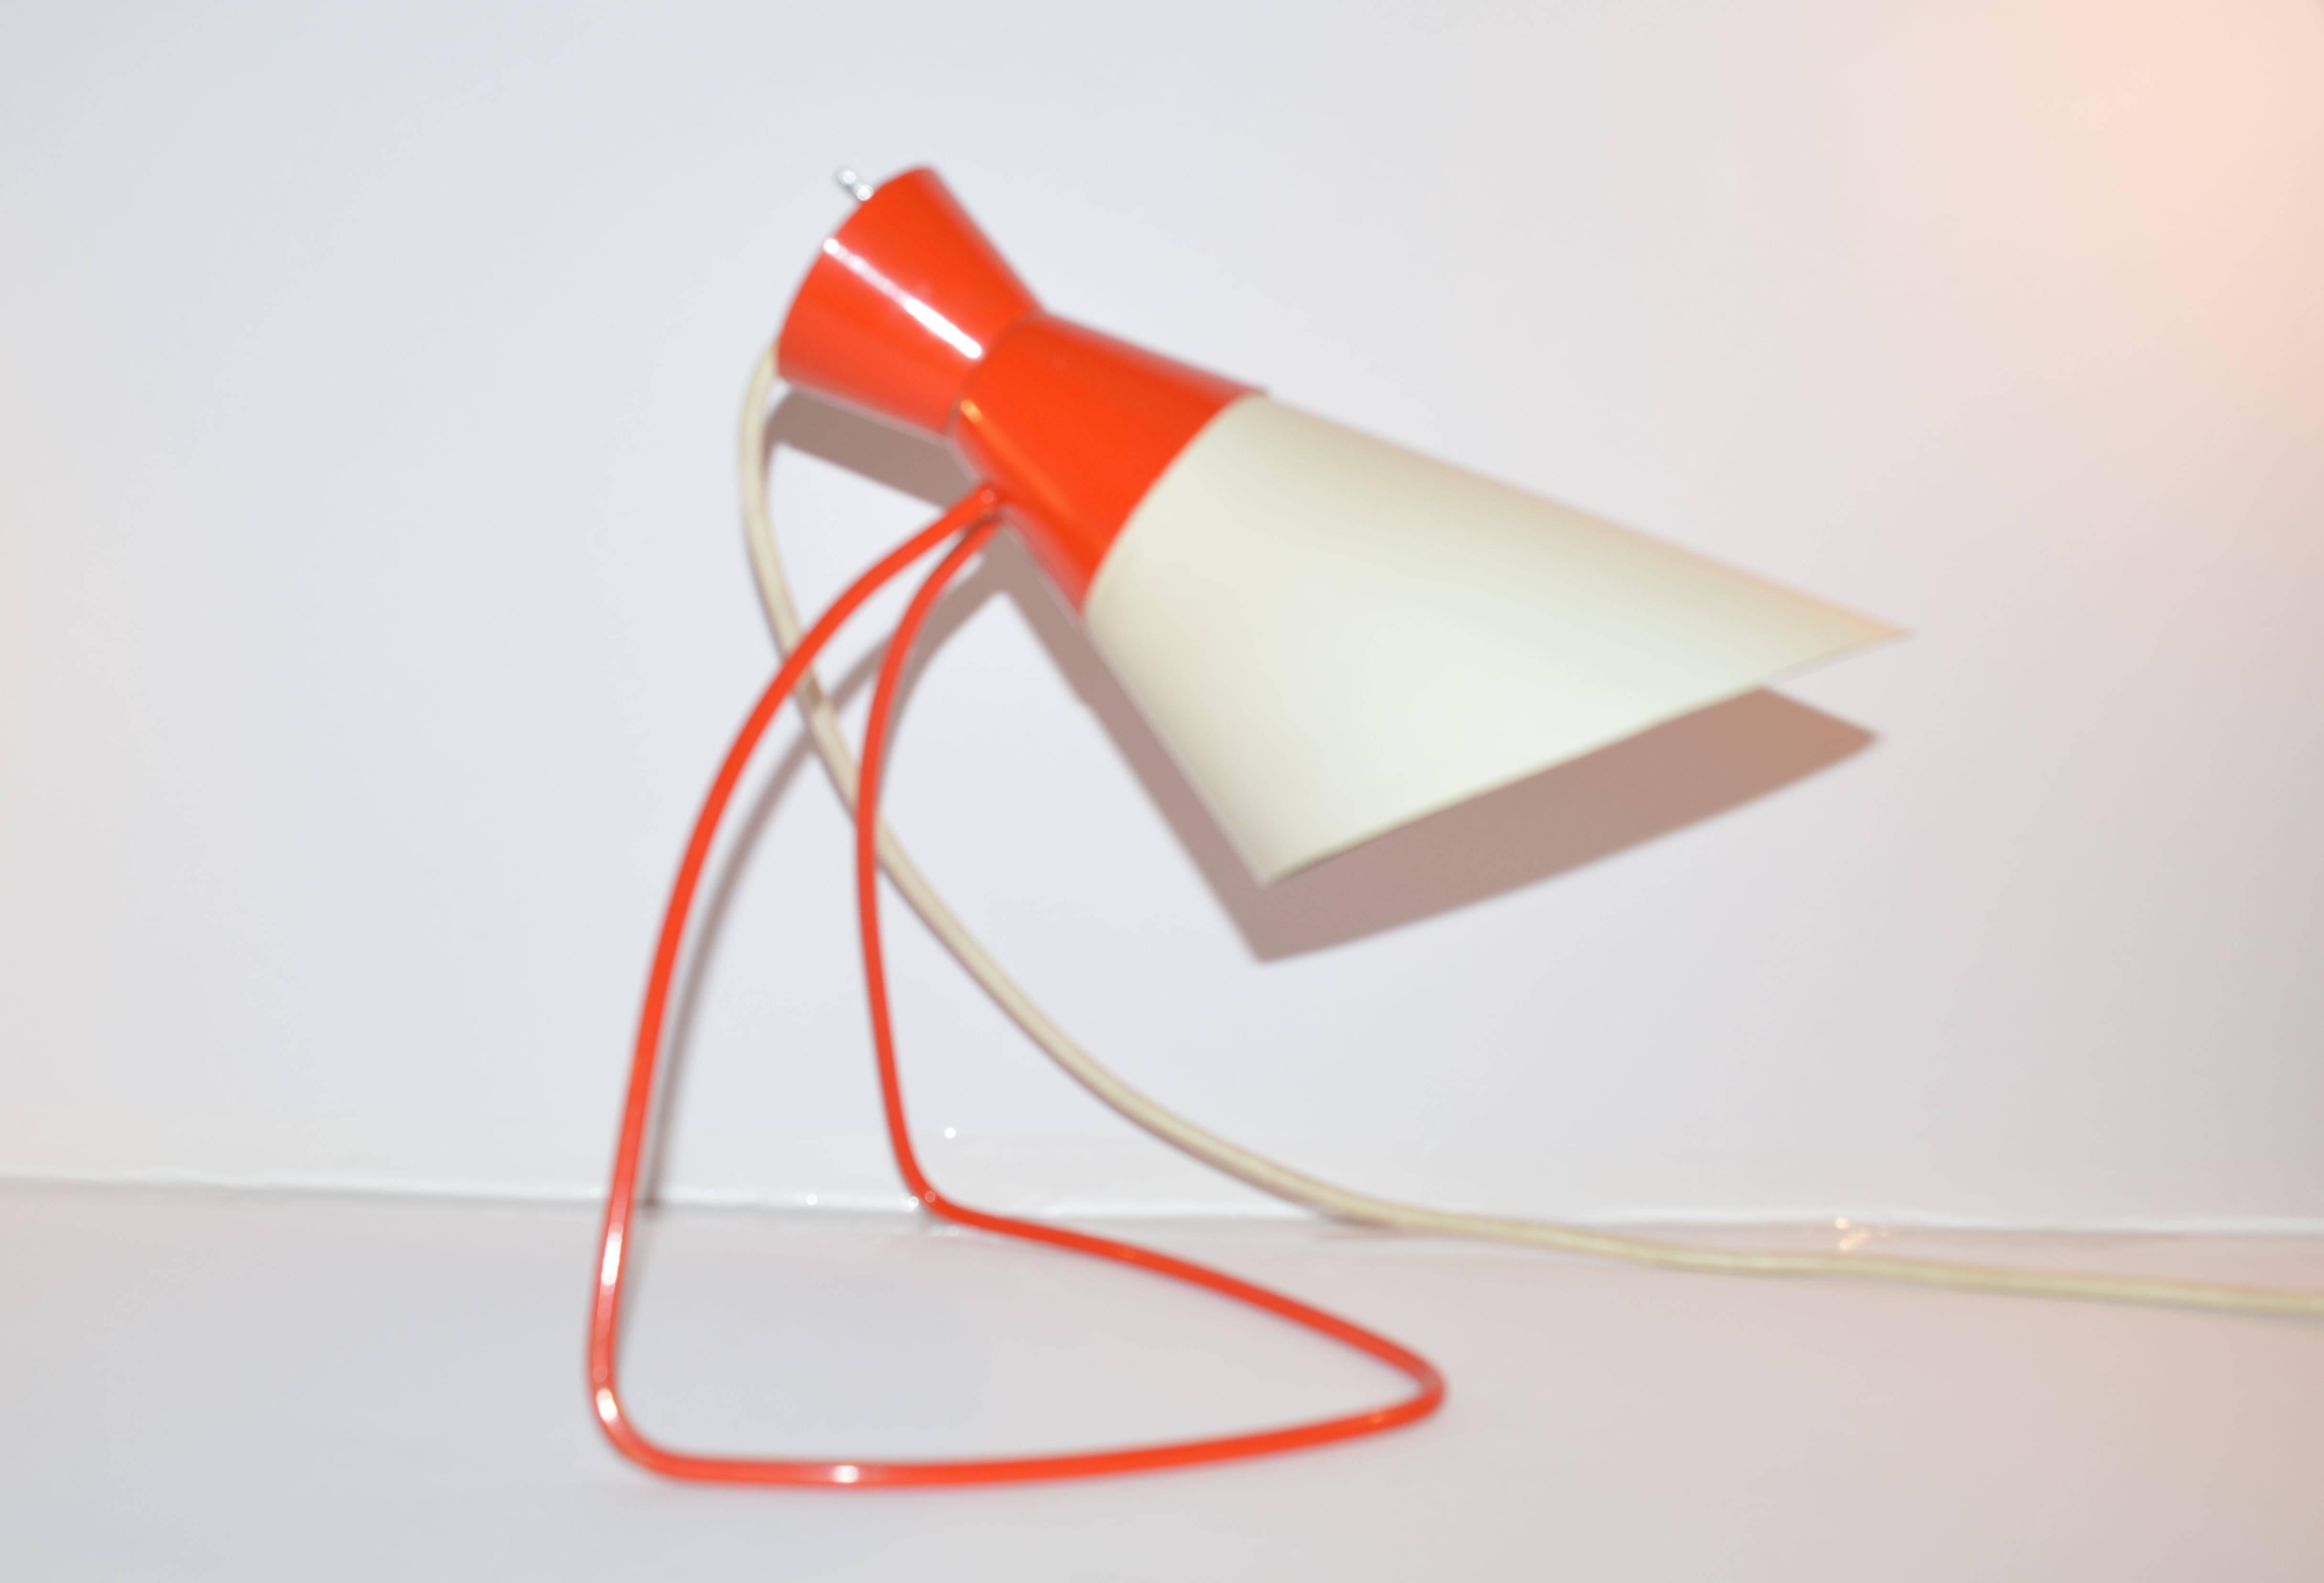 Napako produced this Mid-Century red and white table lamp in 1958. It is made out of steel and was designed by Josef Hurka. Very good original condition.